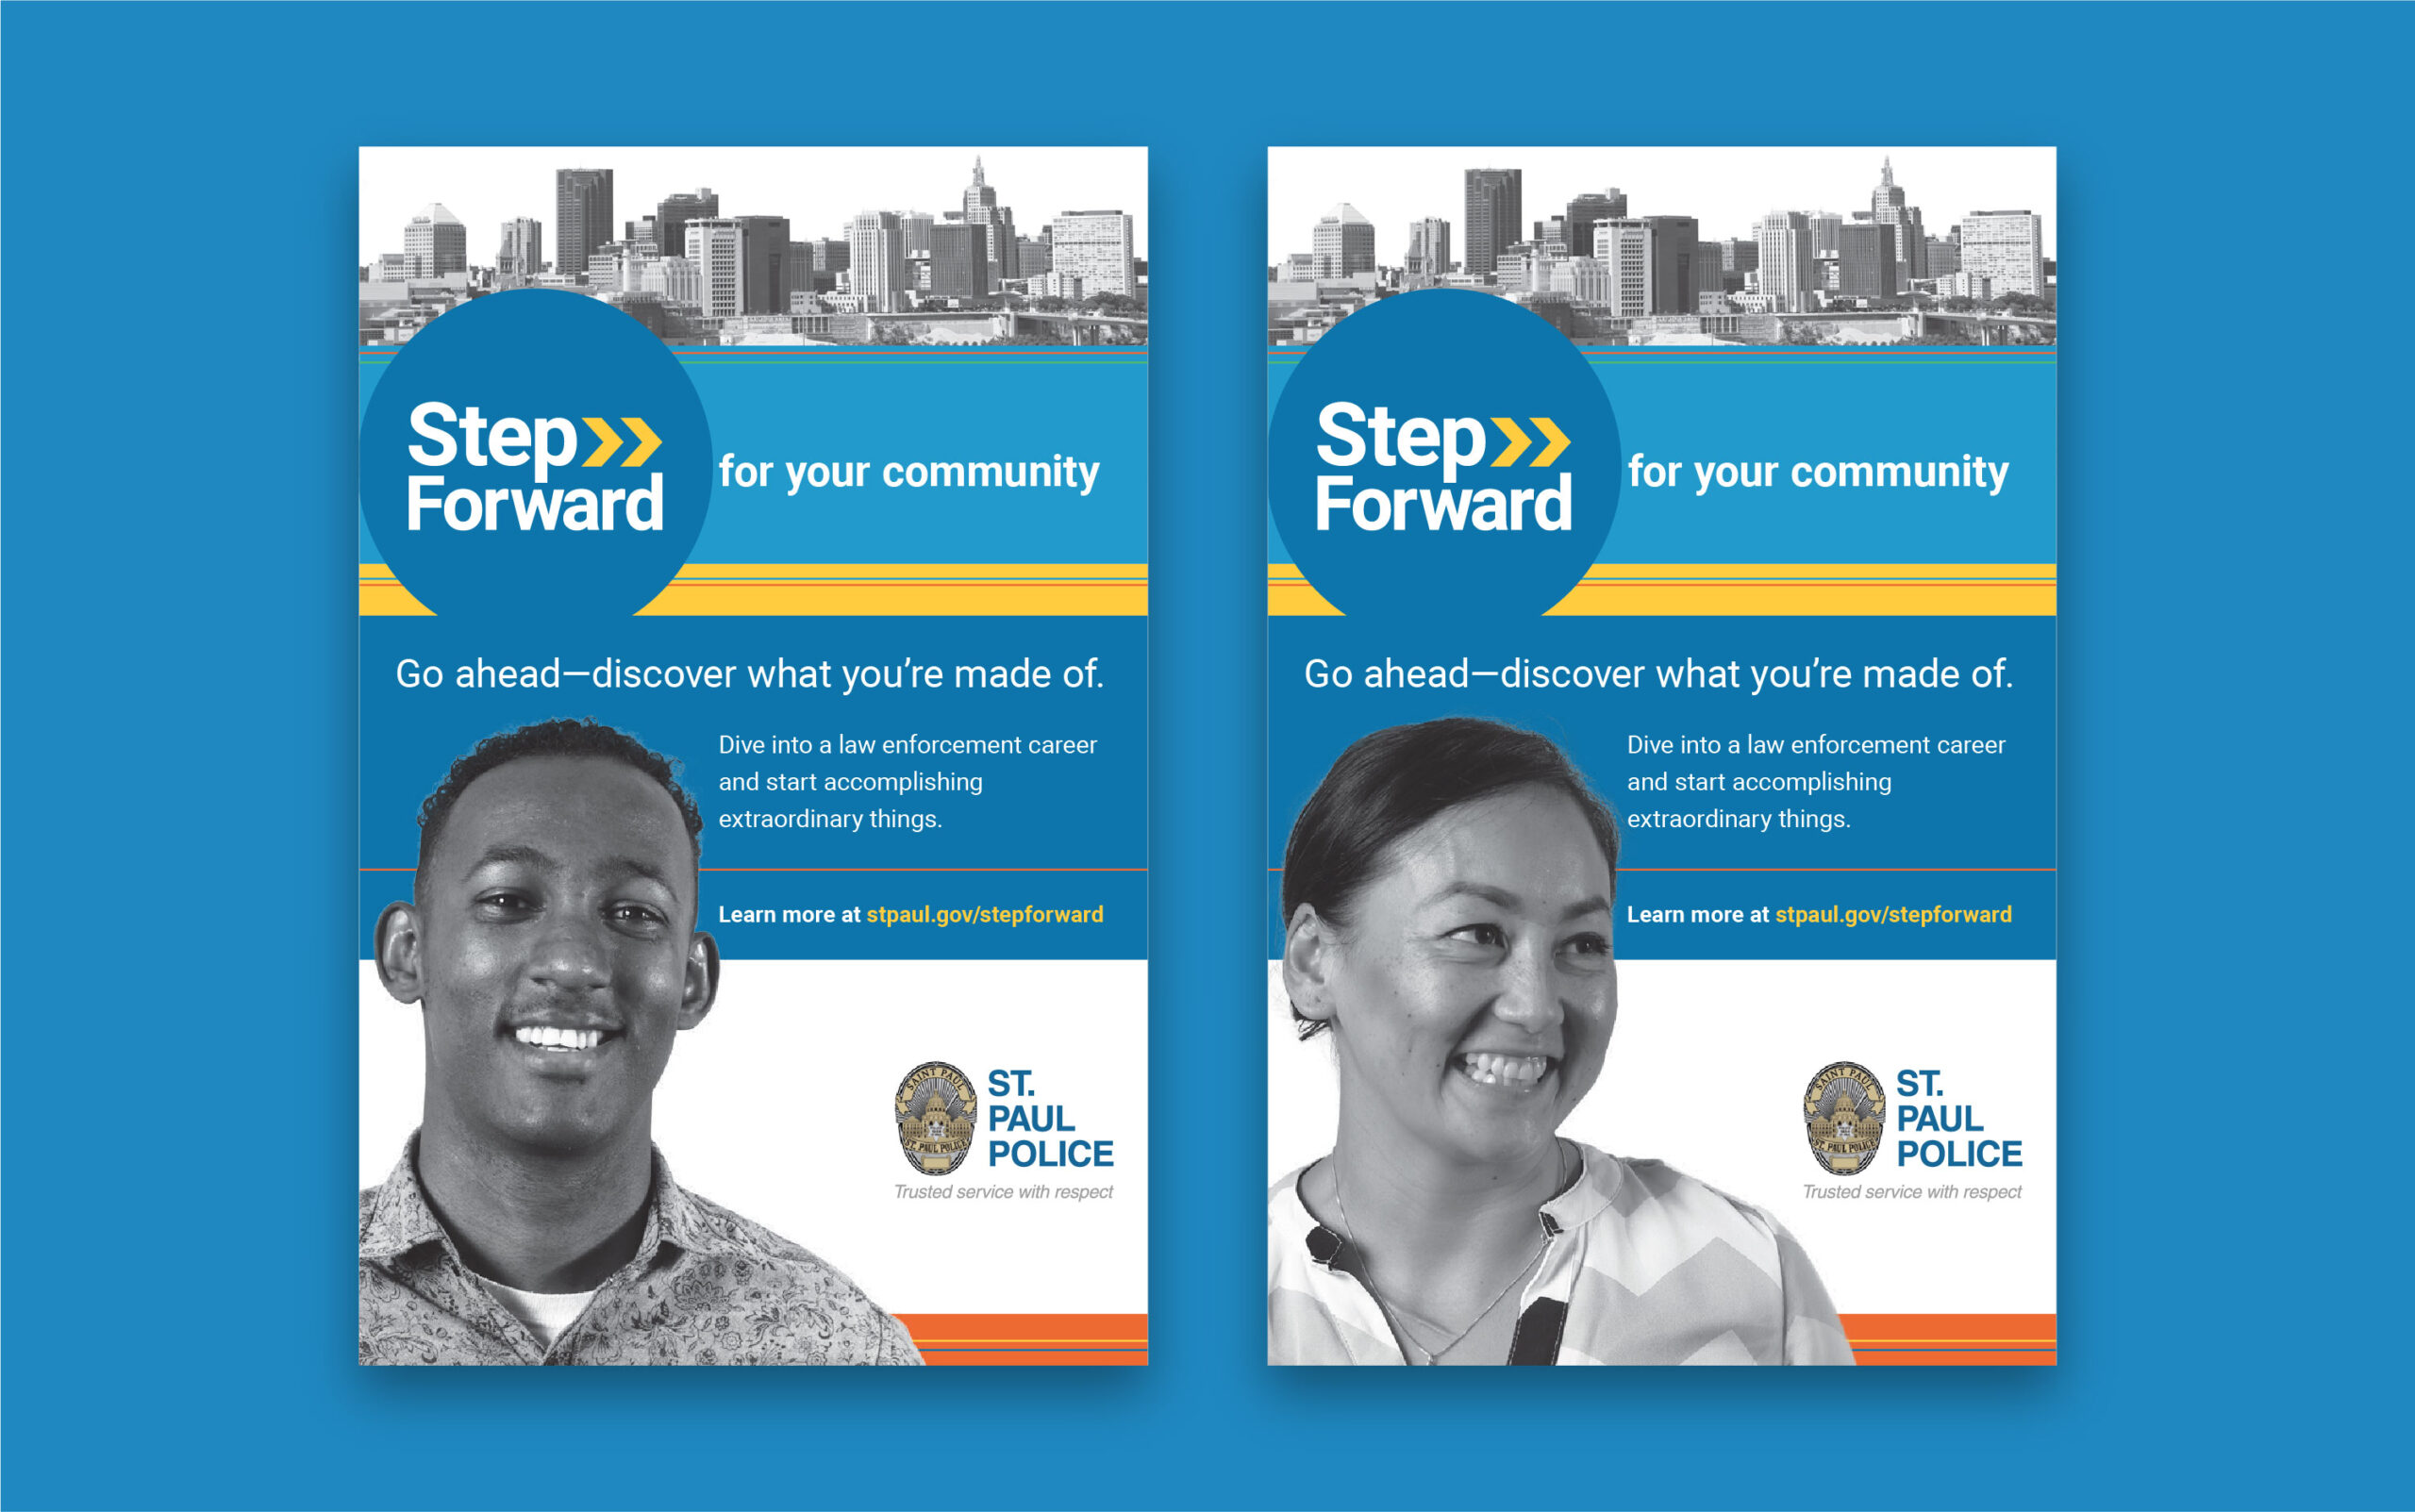 Multicultural campaign posters for Saint Paul Police Department